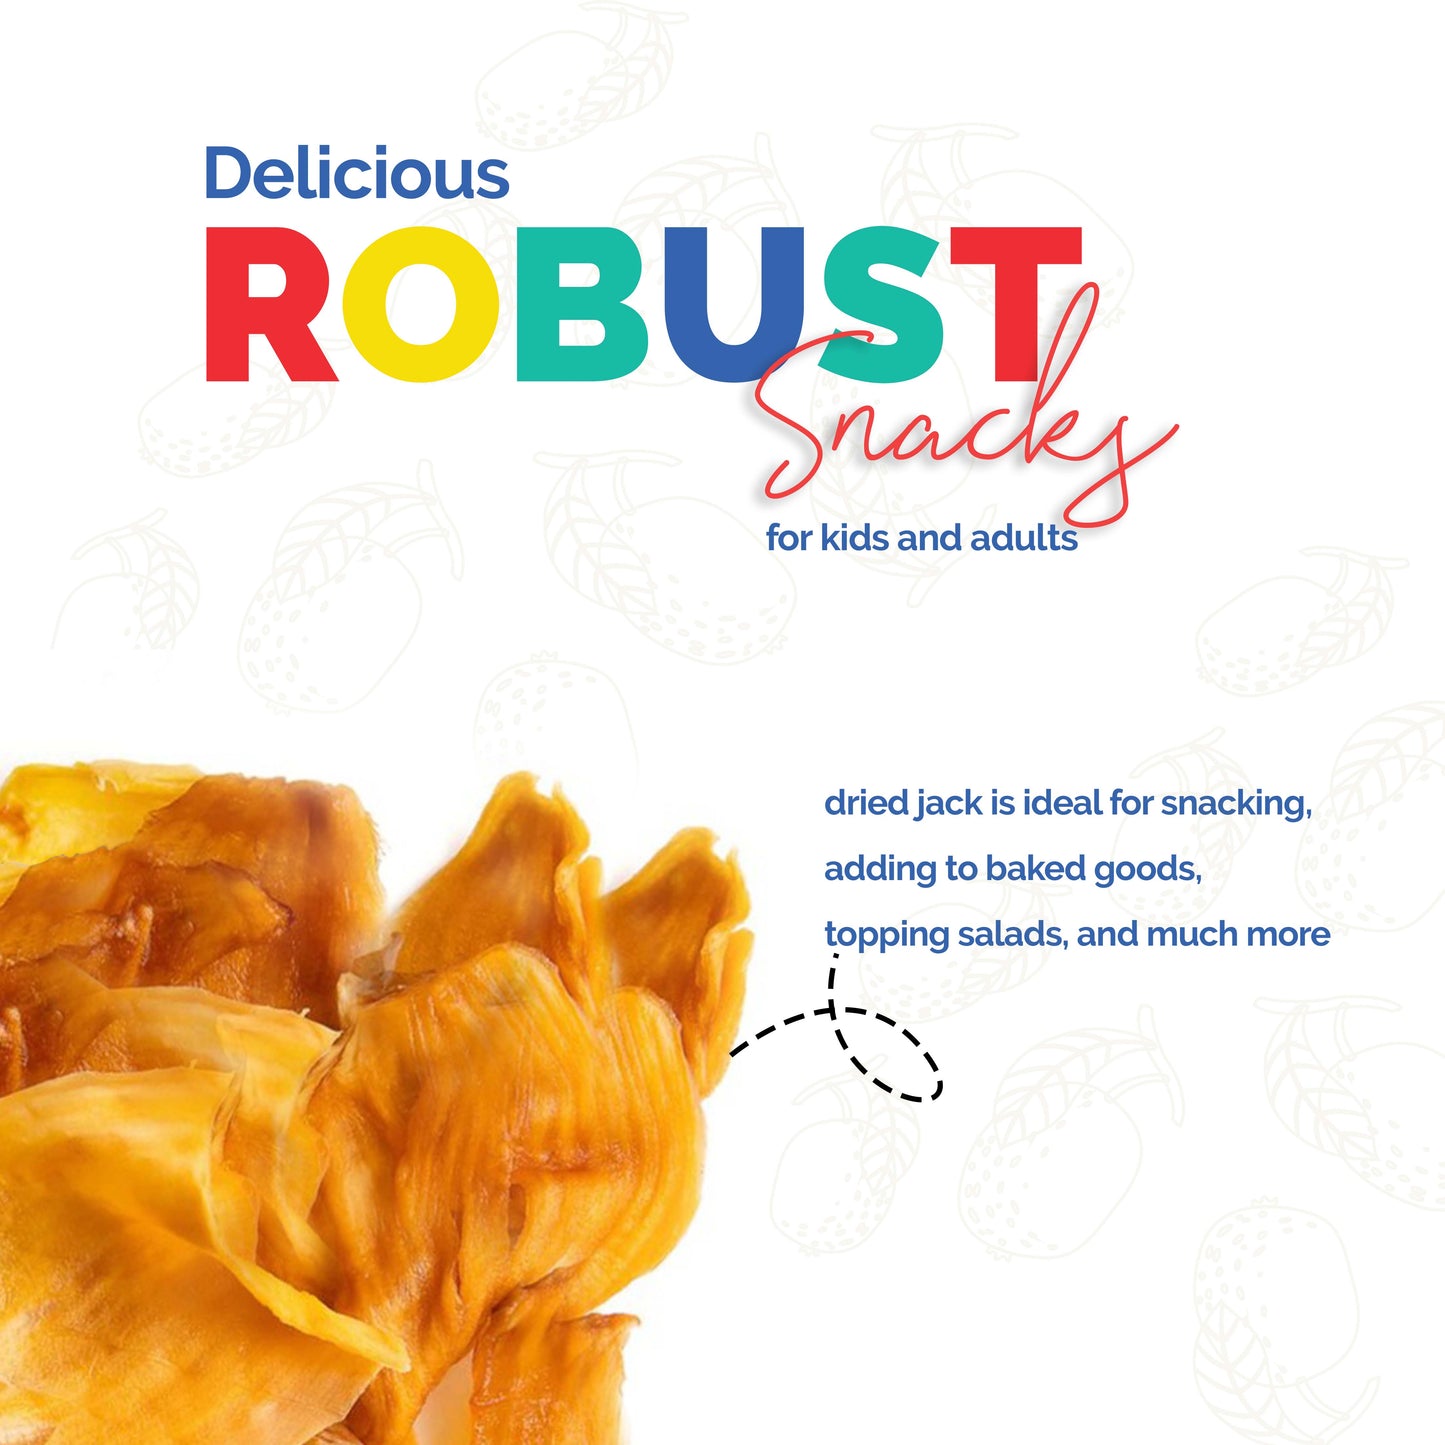 
                  
                    Delicious Robust jackfruit snacks : Dried jackfruit is ideal for snacking adding to baked goods, topping salads and much more. Akshar Organic Dried Jackfruit snacks, 1Lb Unsweetened Dehydrated Jackfruit Slices Perfect for Kids & Adults, Healthy Dried Jackfruit Snack Packs, Dry Tropical Jackfruit, No Sugar Added, Gluten Free 16oz
                  
                